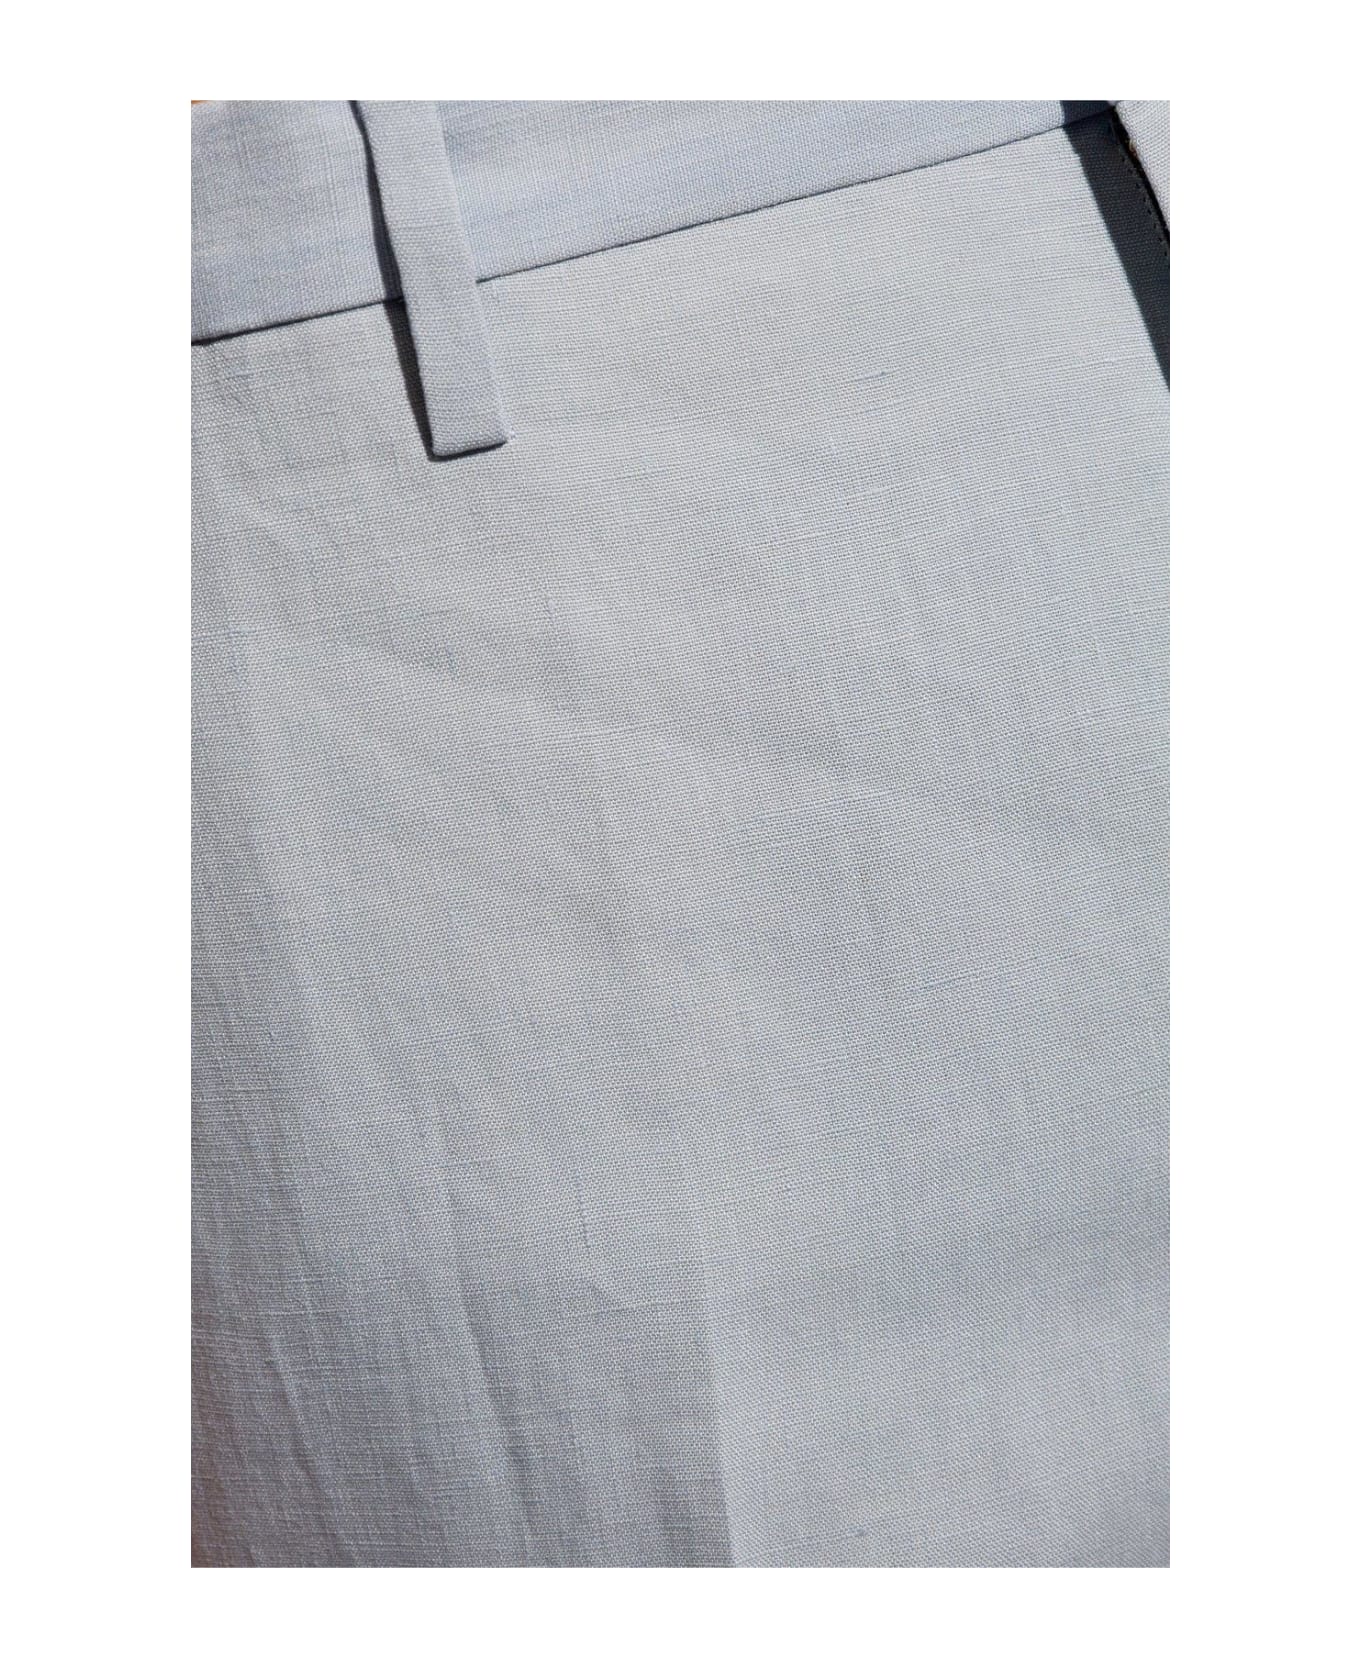 Paul Smith Linen Pleat Front Trousers - LIGHT BLUE ボトムス